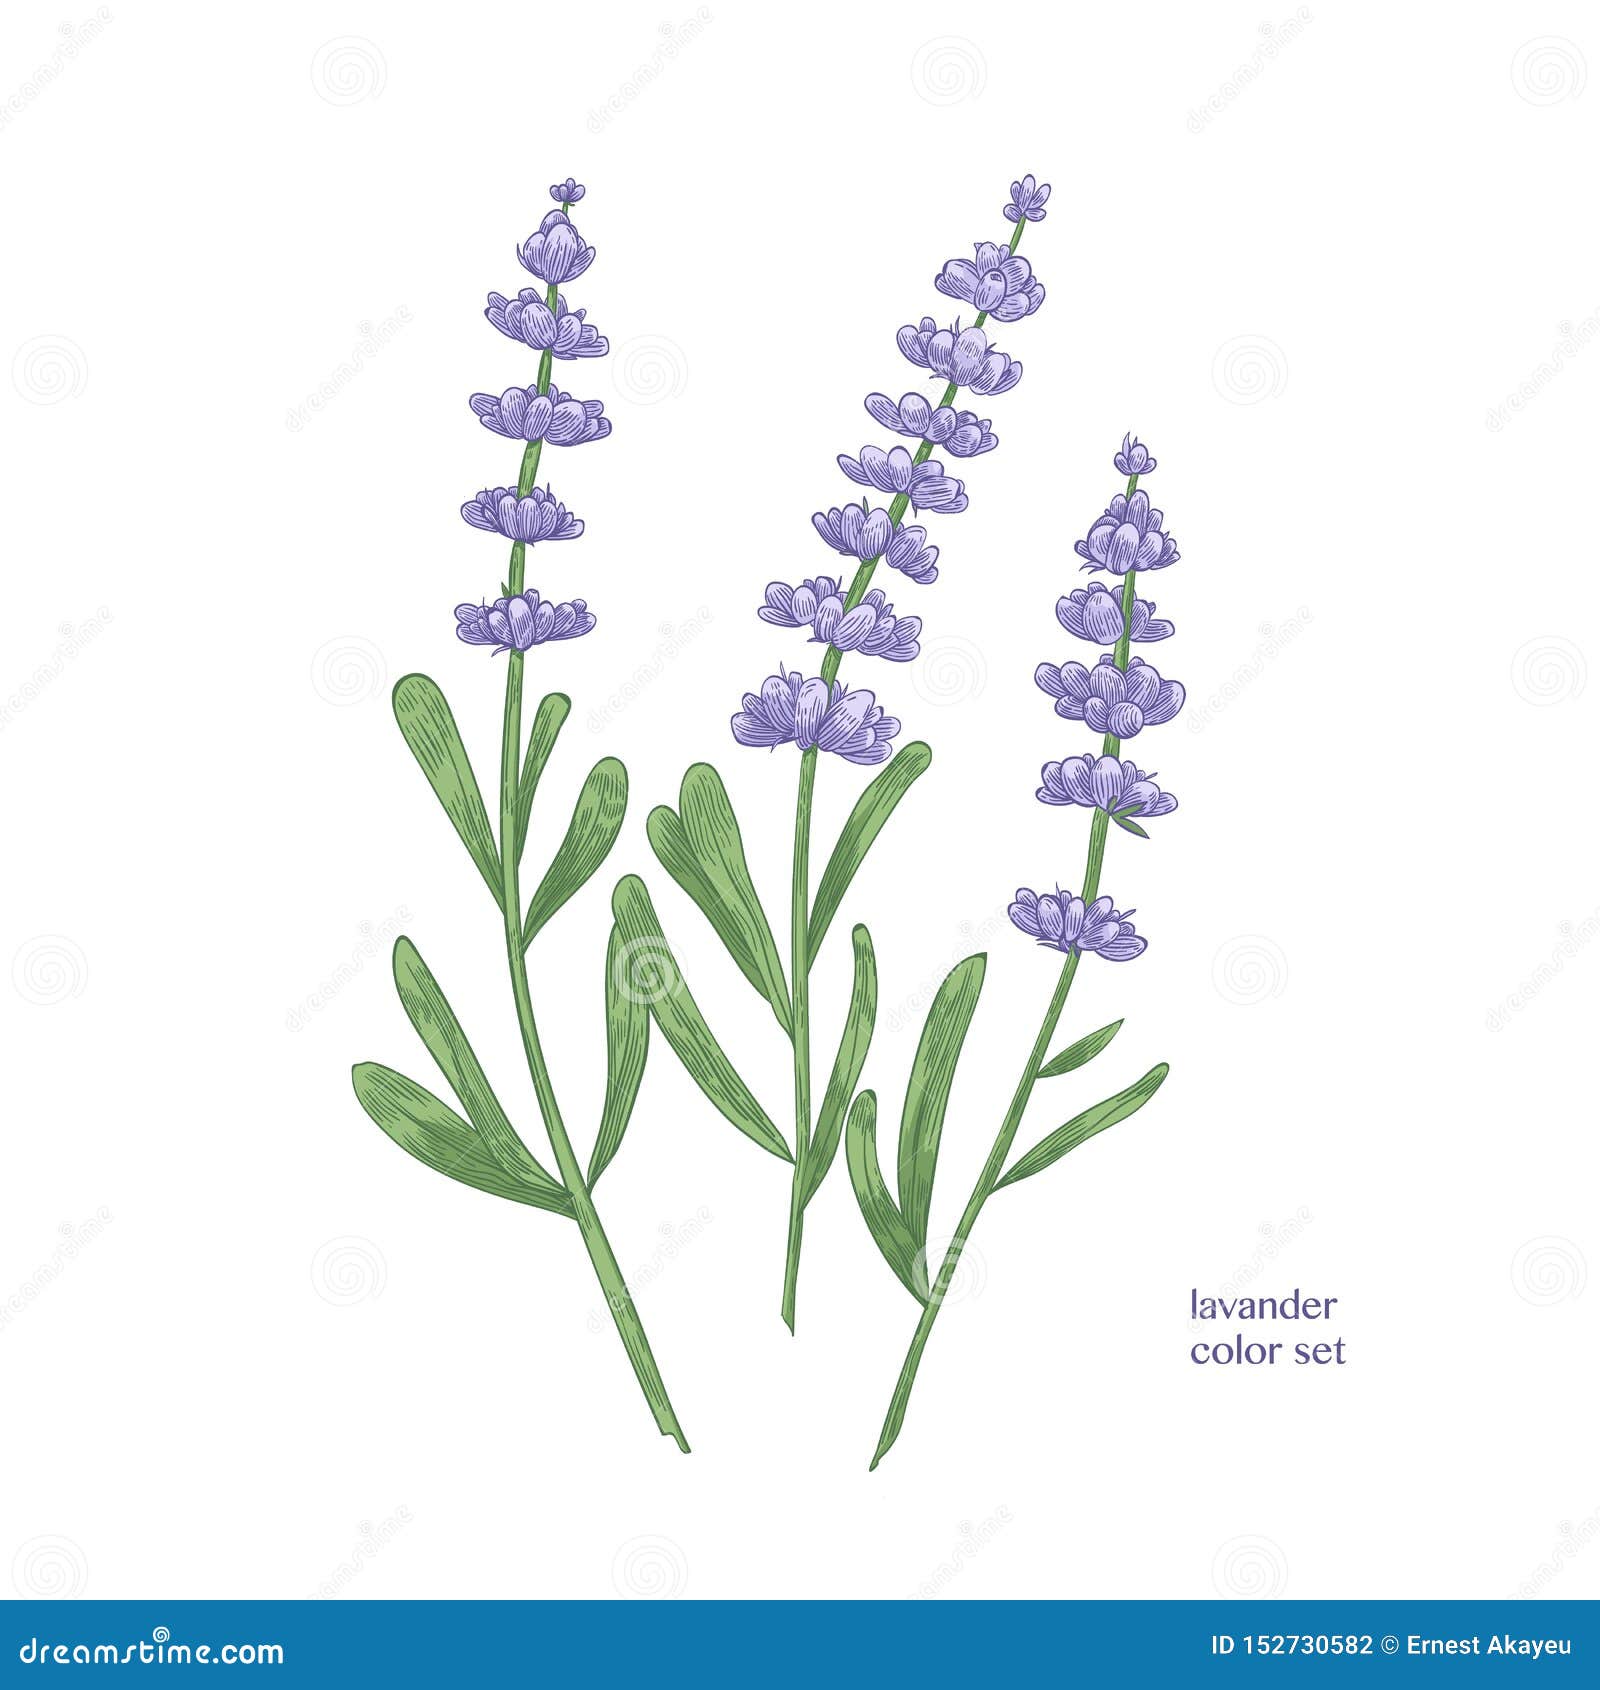 How to Draw Lavender  Really Easy Drawing Tutorial